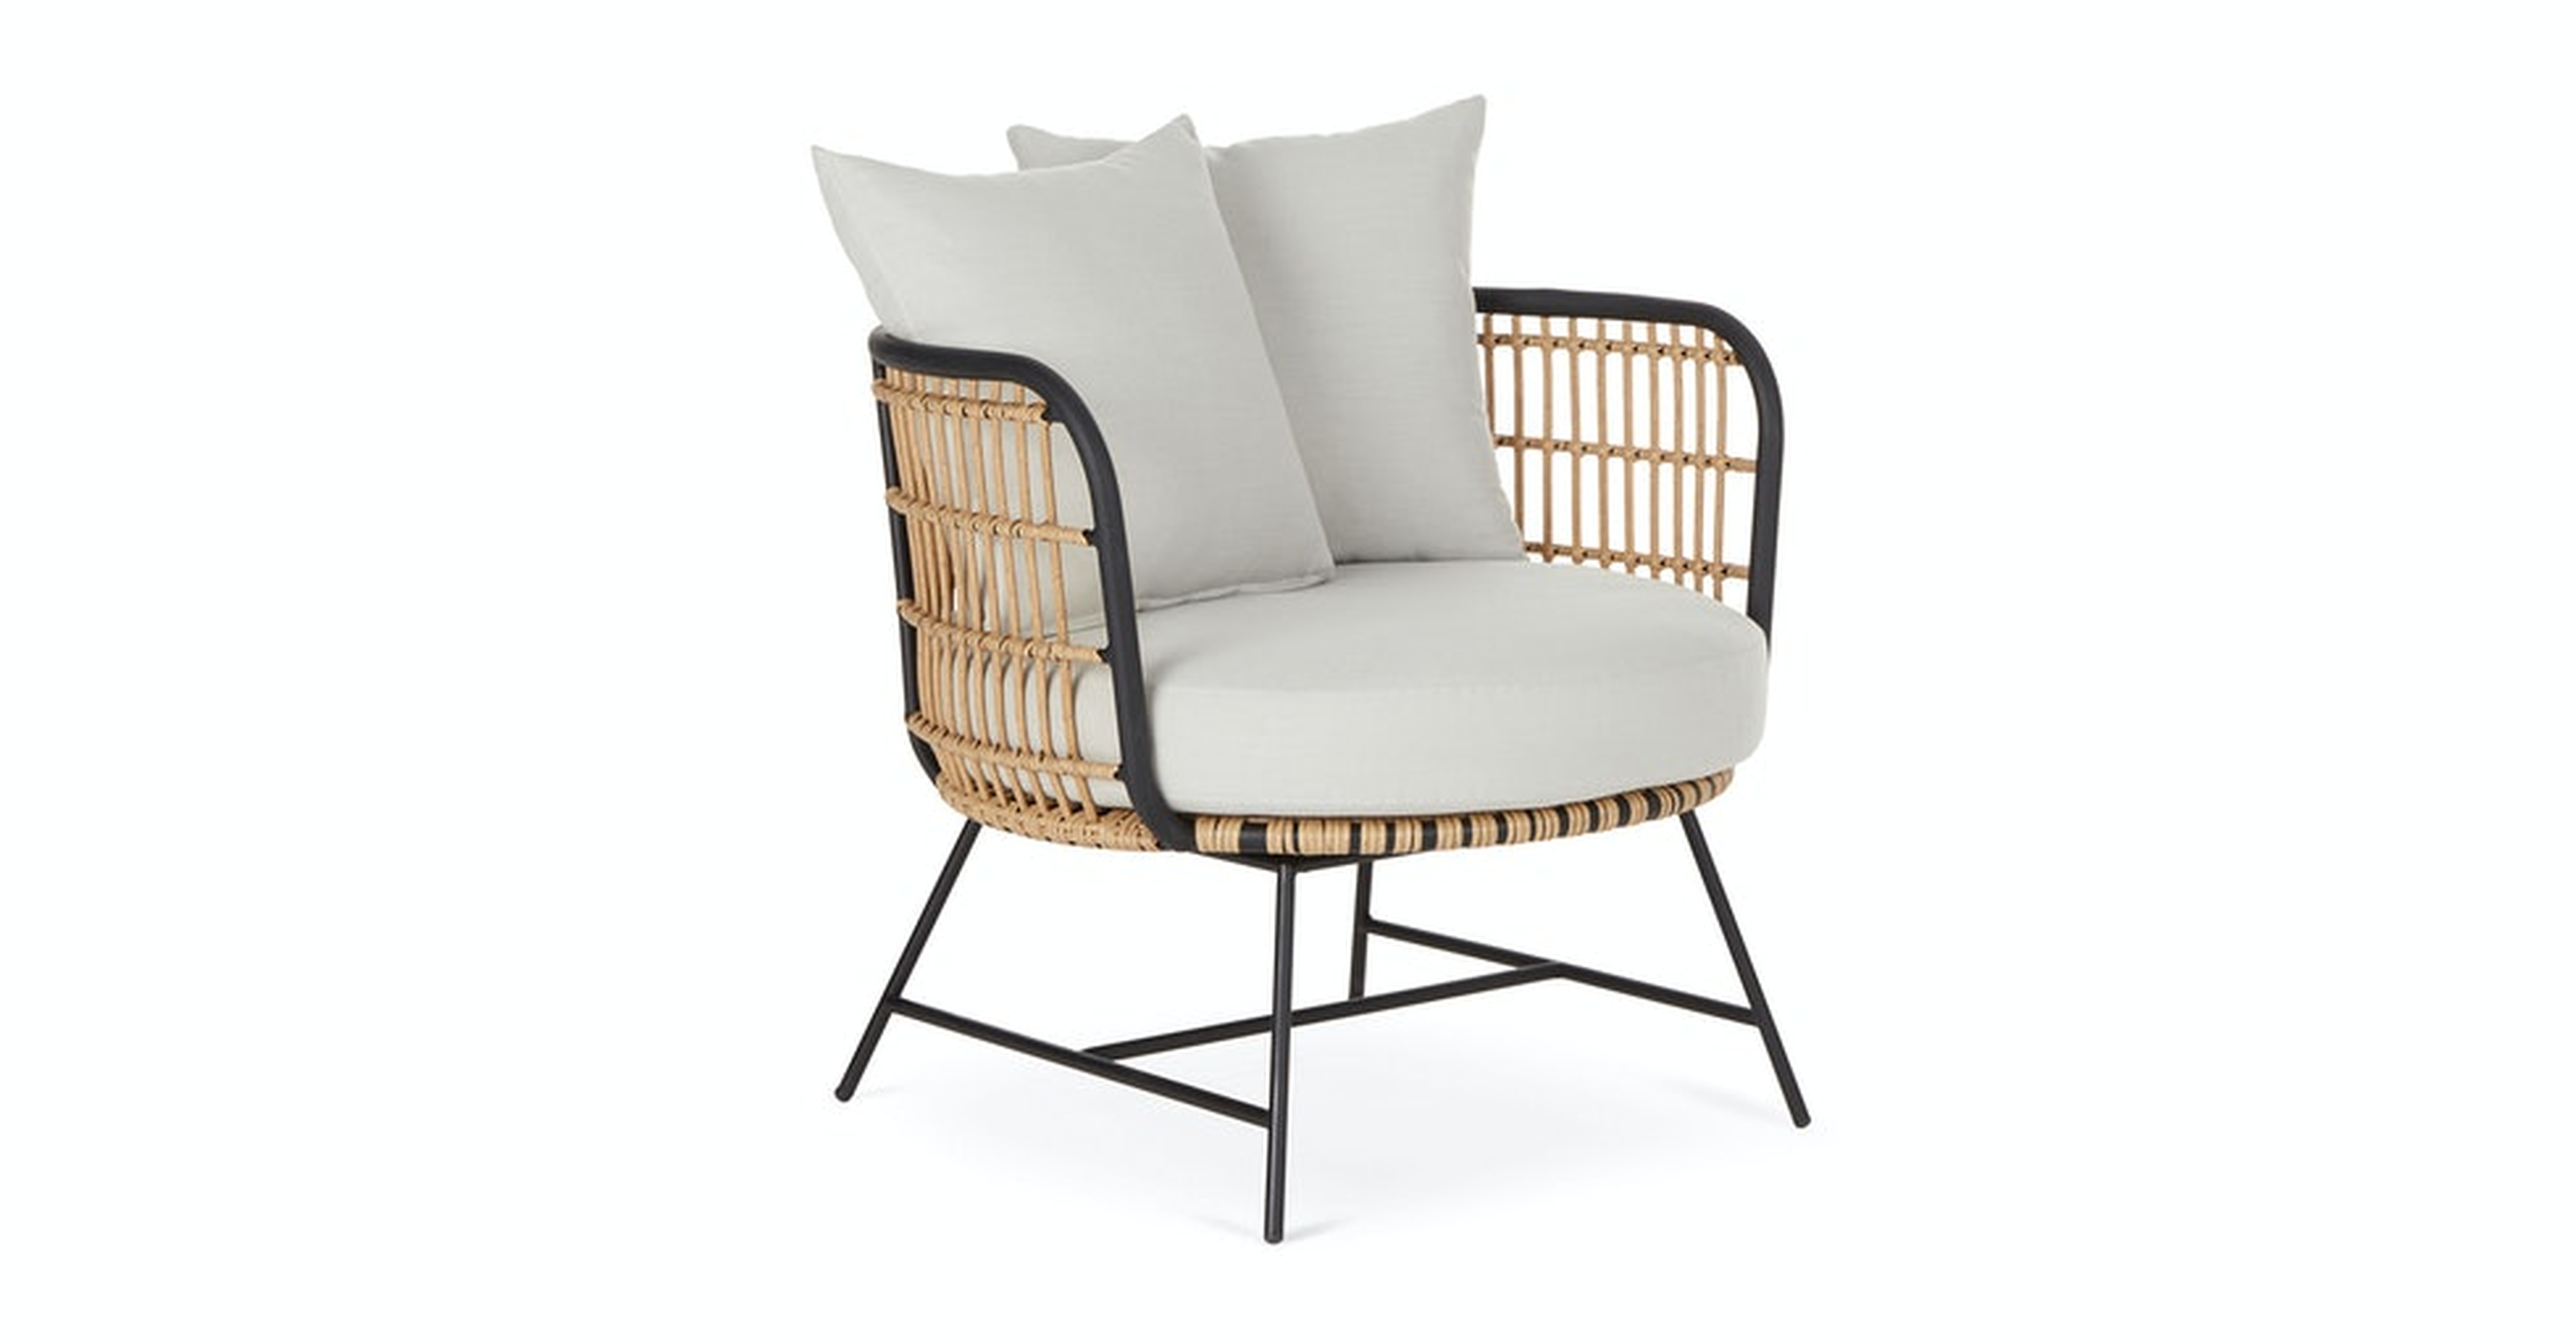 Onya Lily White Lounge Chair - Article